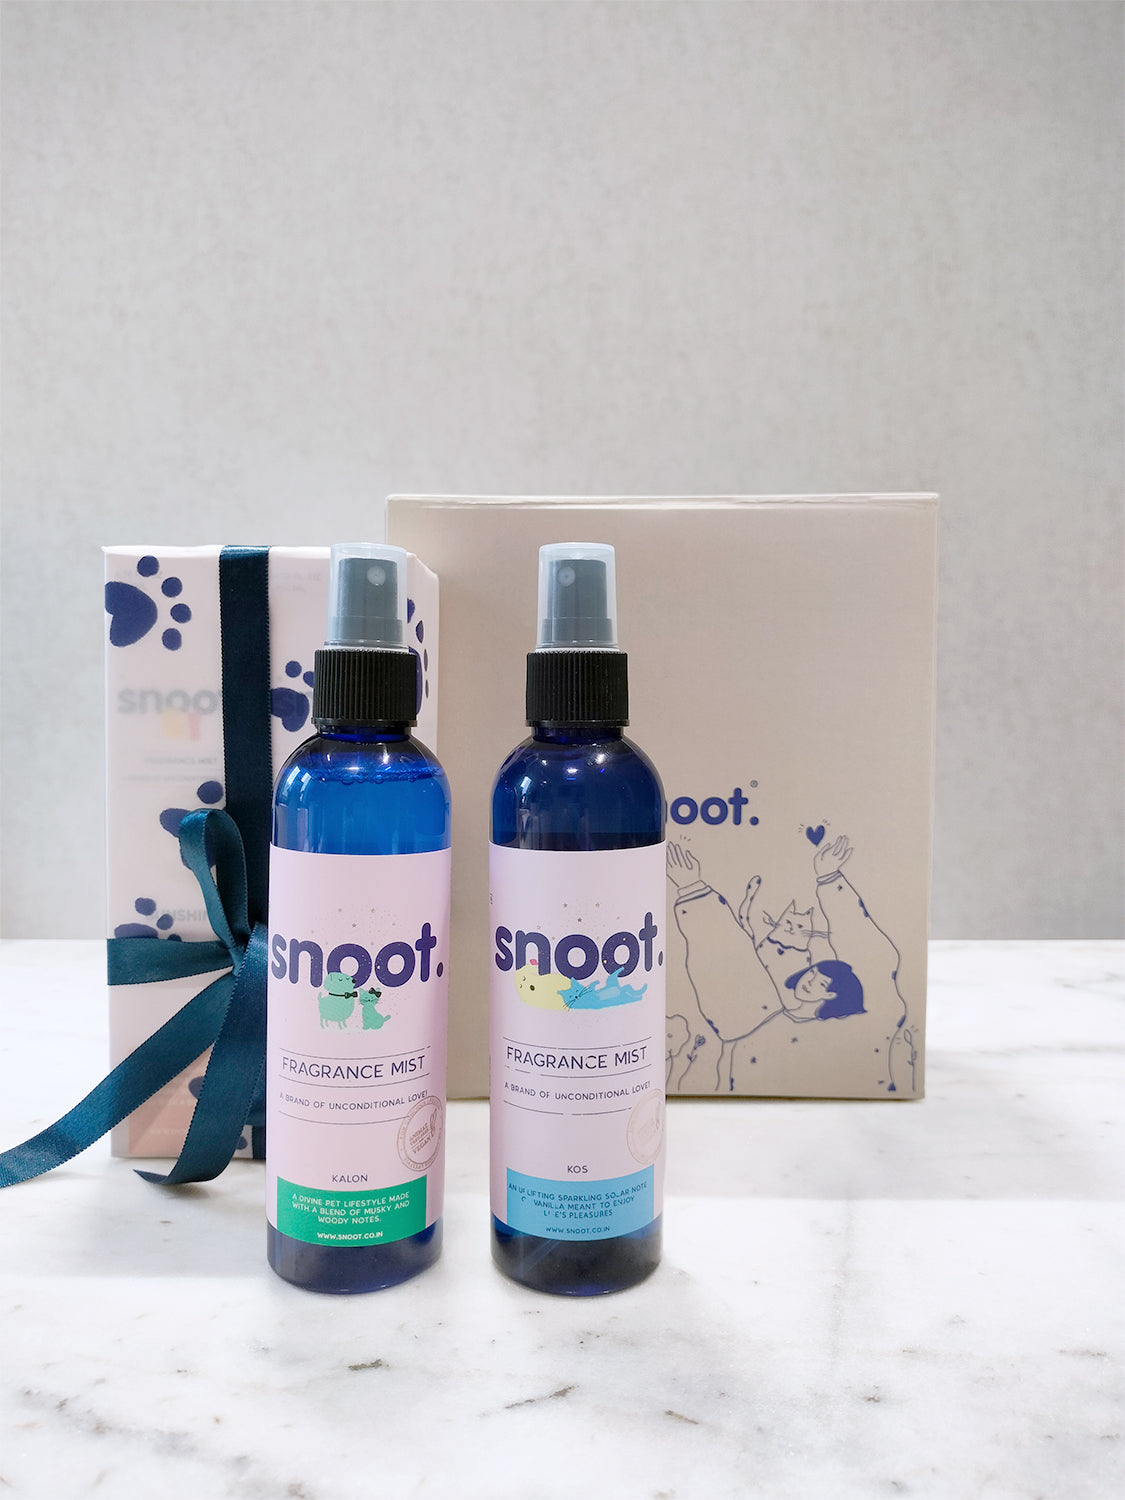 Gift Set for Pets, Dogs and Cats featuring two fragrance mists to refresh their coats.